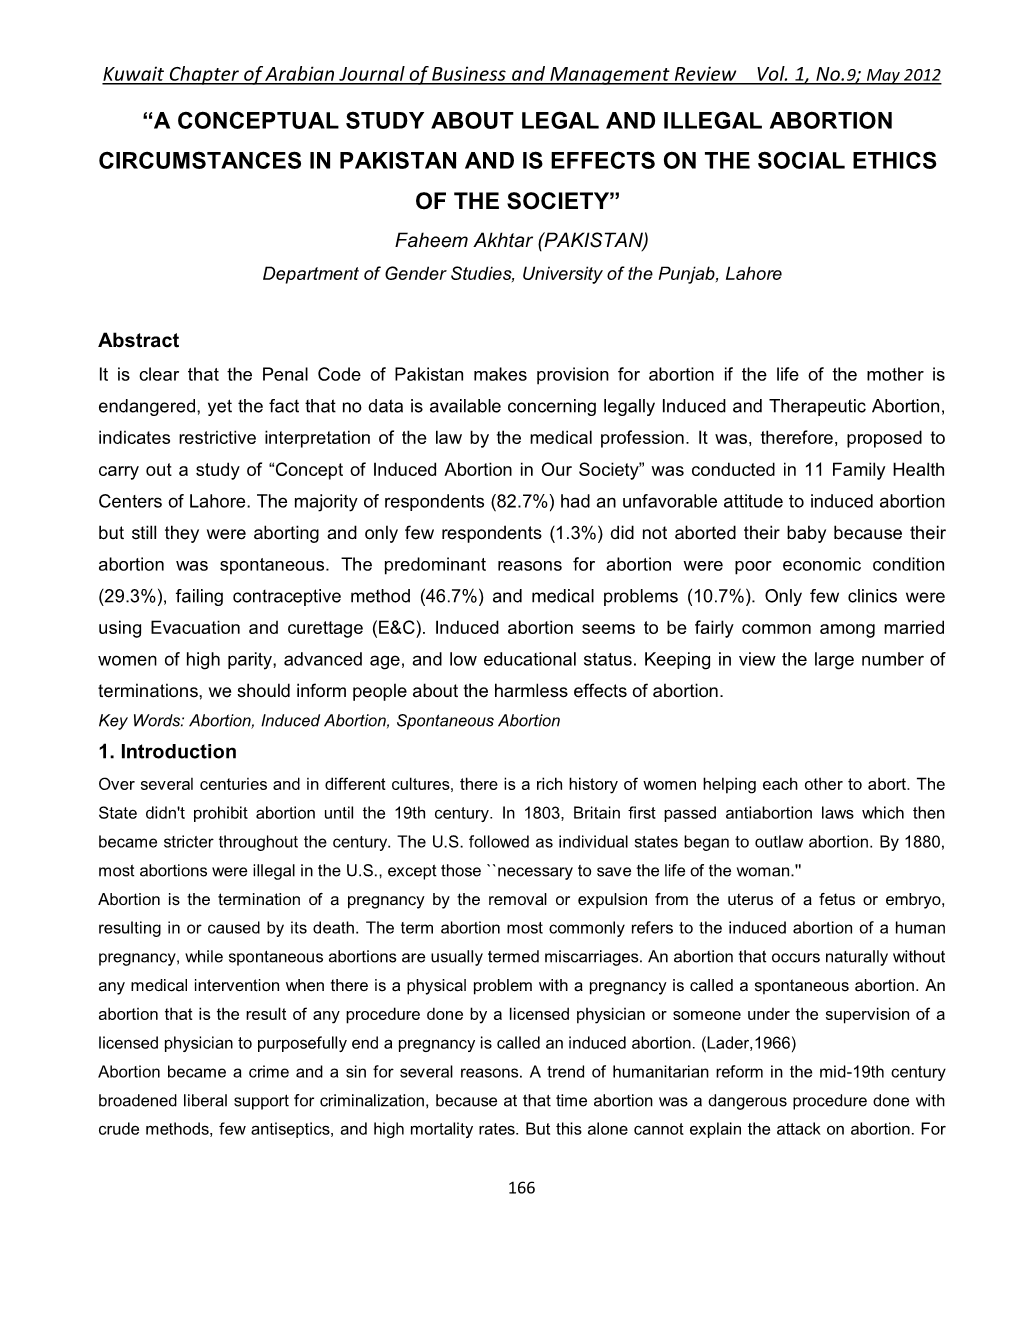 A Conceptual Study About Legal and Illegal Abortion Circumstances in Pakistan and Is Effects on the Social Ethics